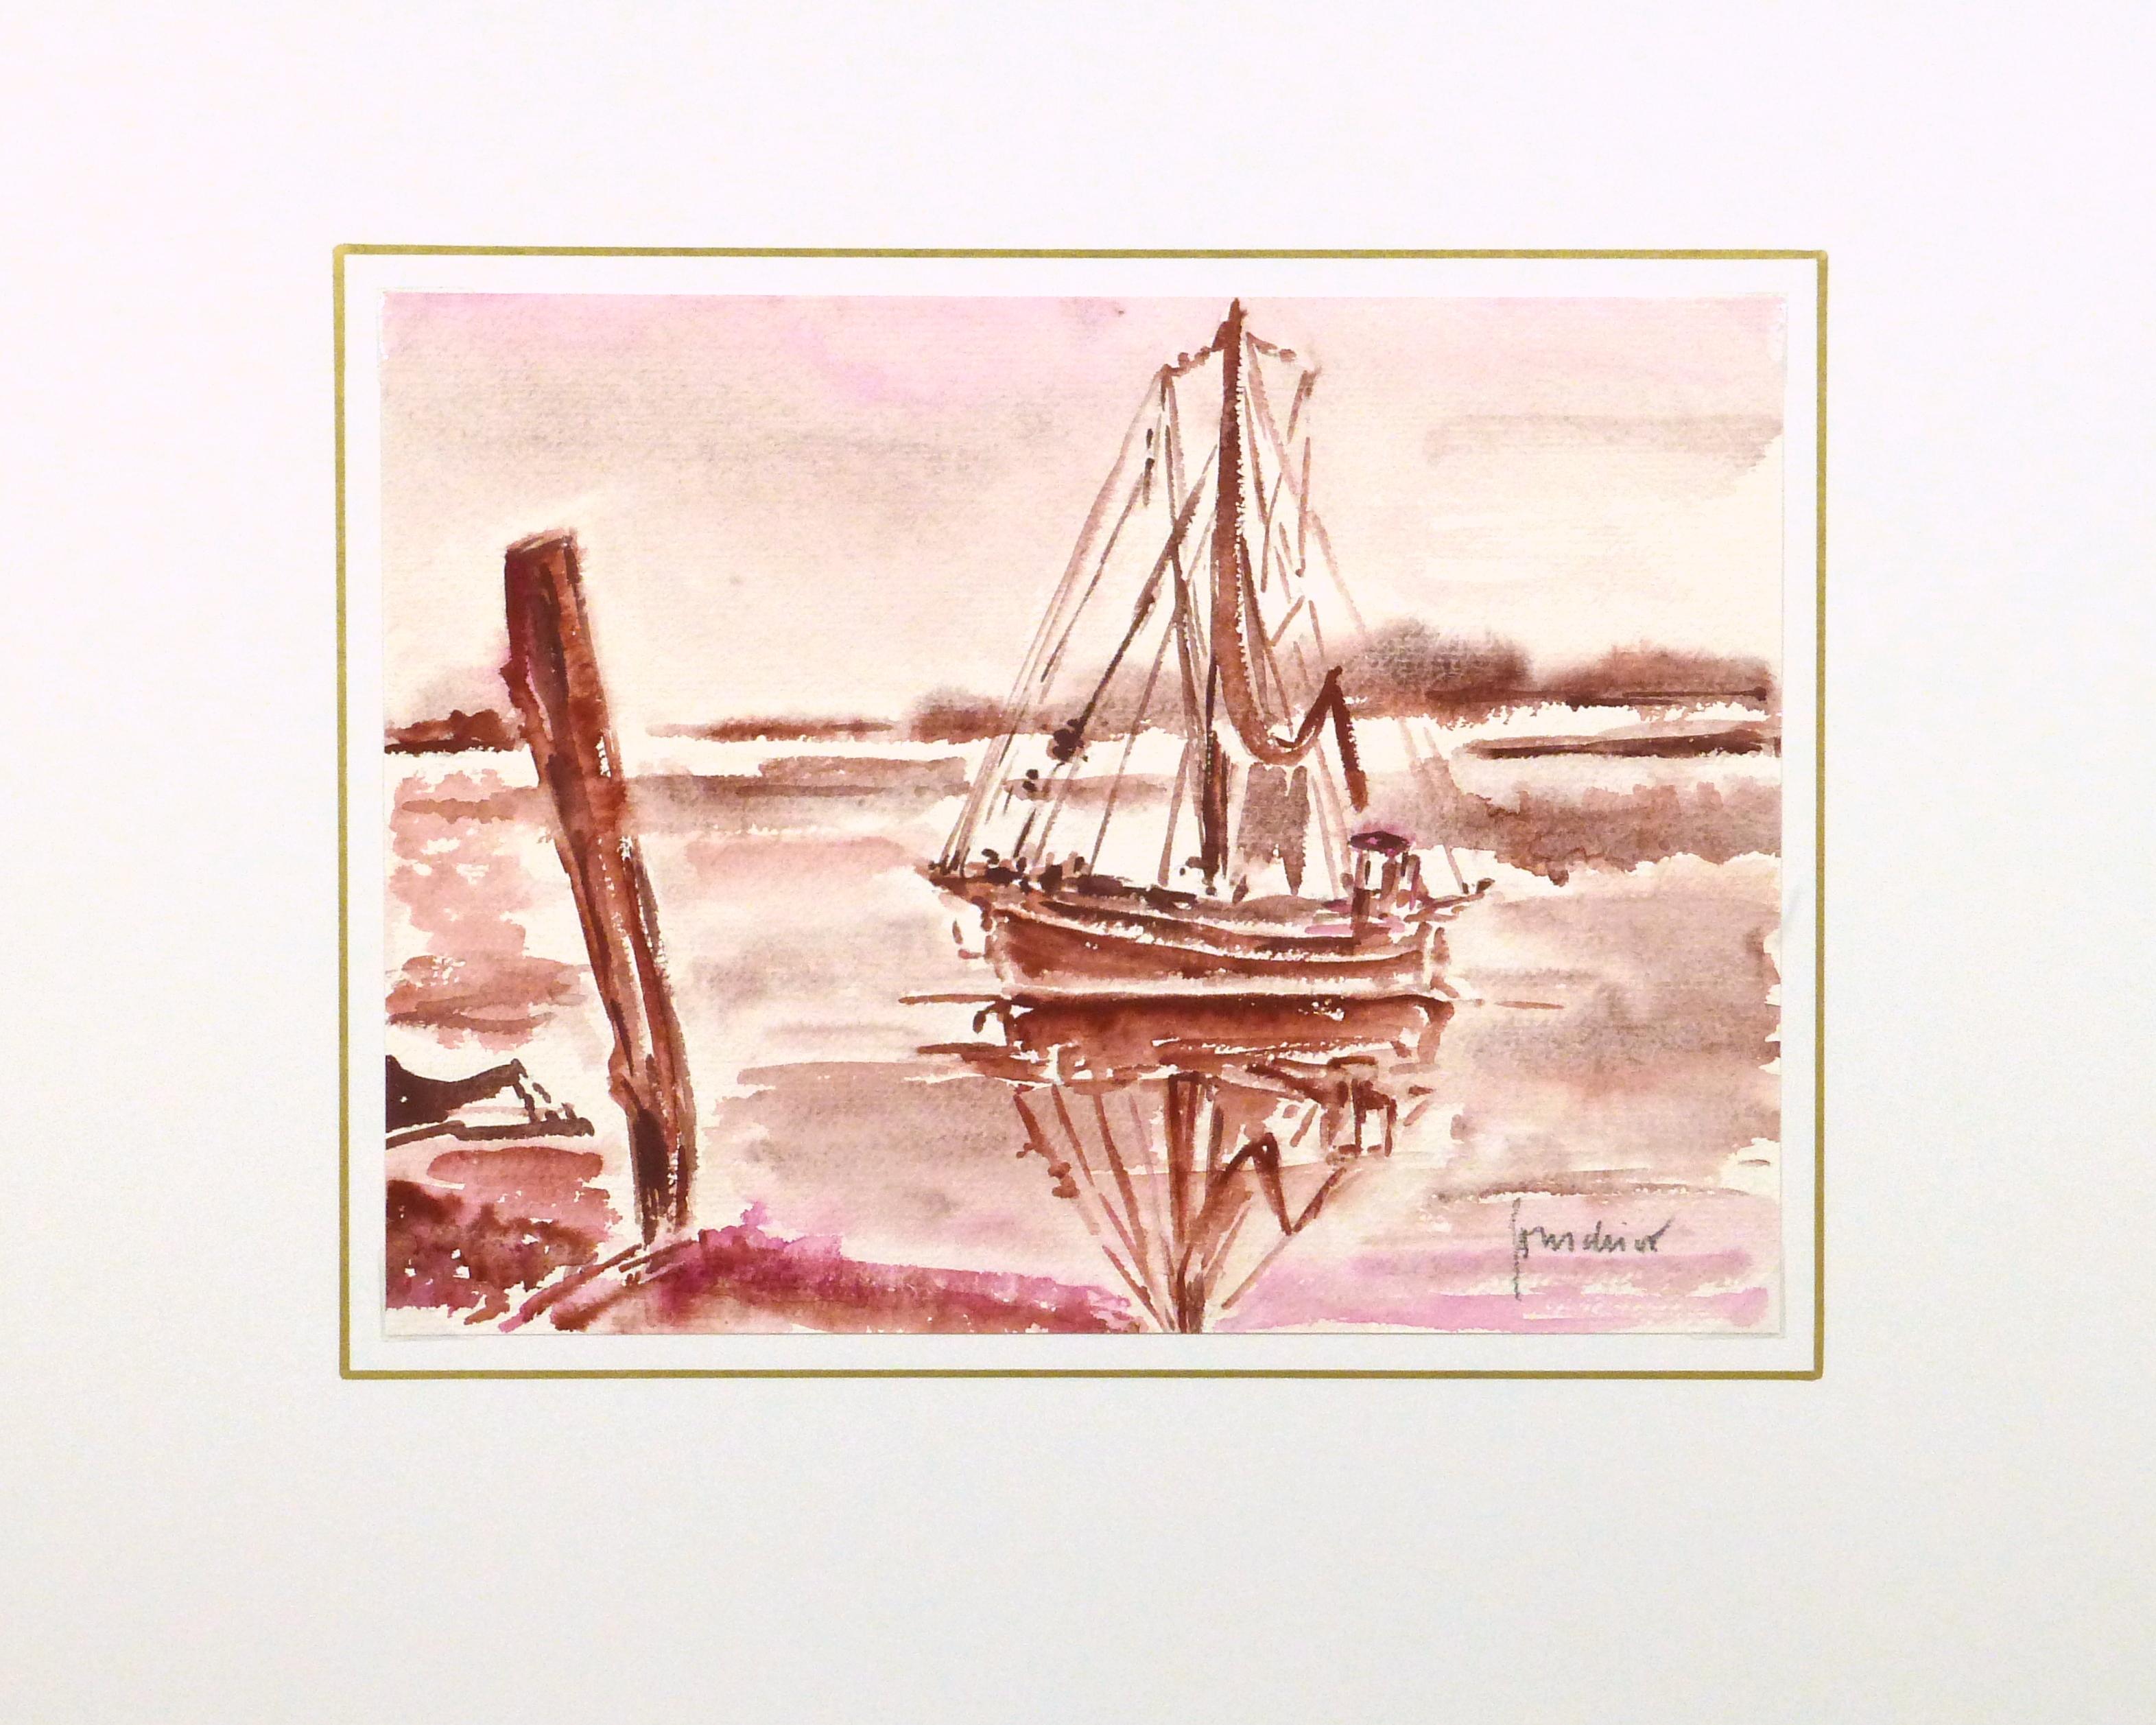 Distinctive French seascape watercolor painting of an anchored sailing vessel in muted shades of crimson, 1982. Signed lower right. 

Displayed on a white mat with a gold border and fits a standard-size frame. Archival plastic sleeve and Certificate